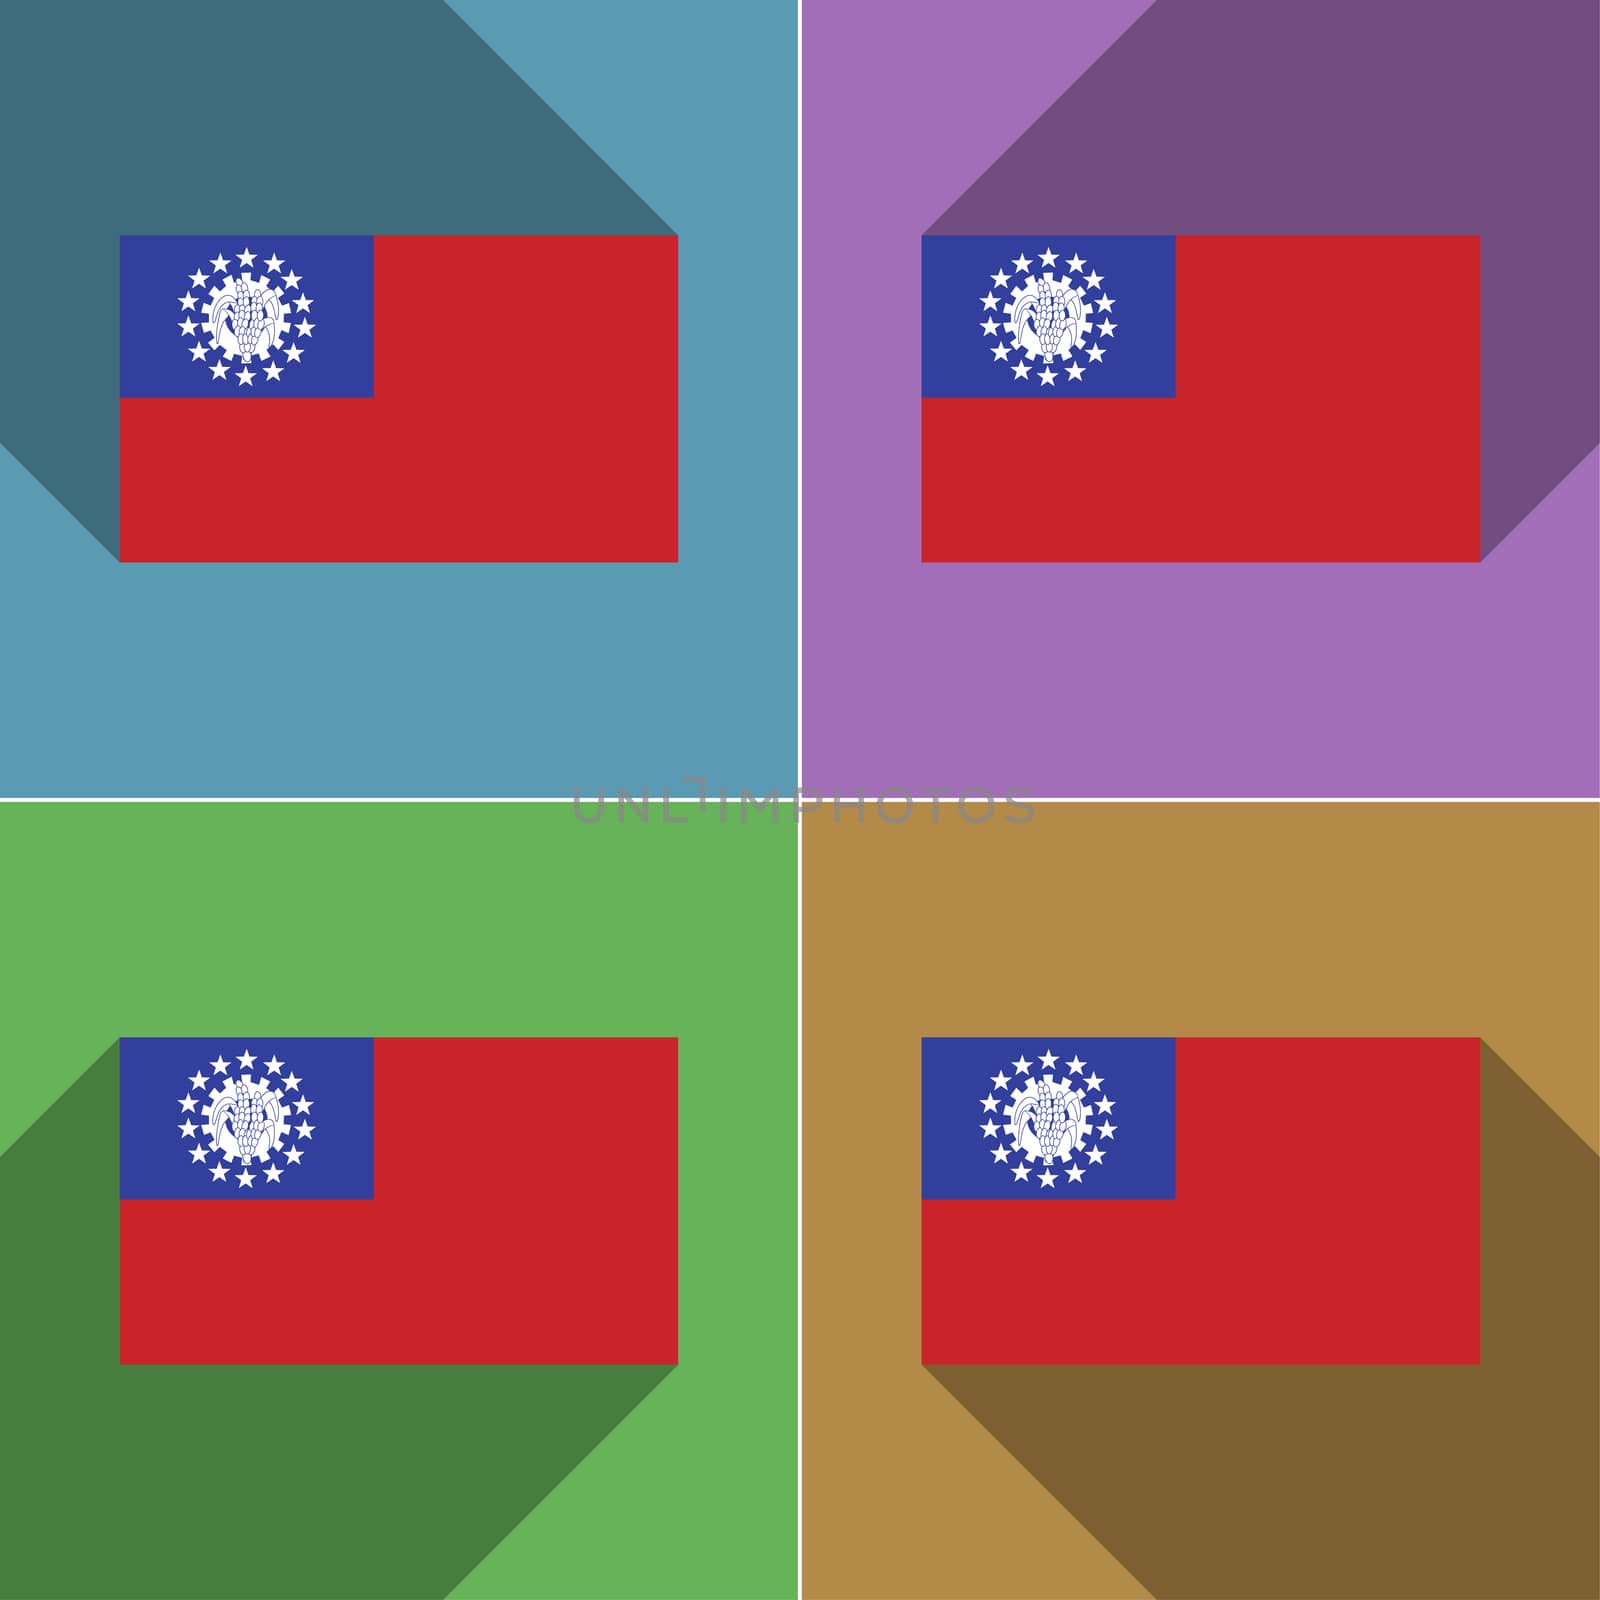 Flags of MyanmarBurma. Set of colors flat design and long shadows.  illustration